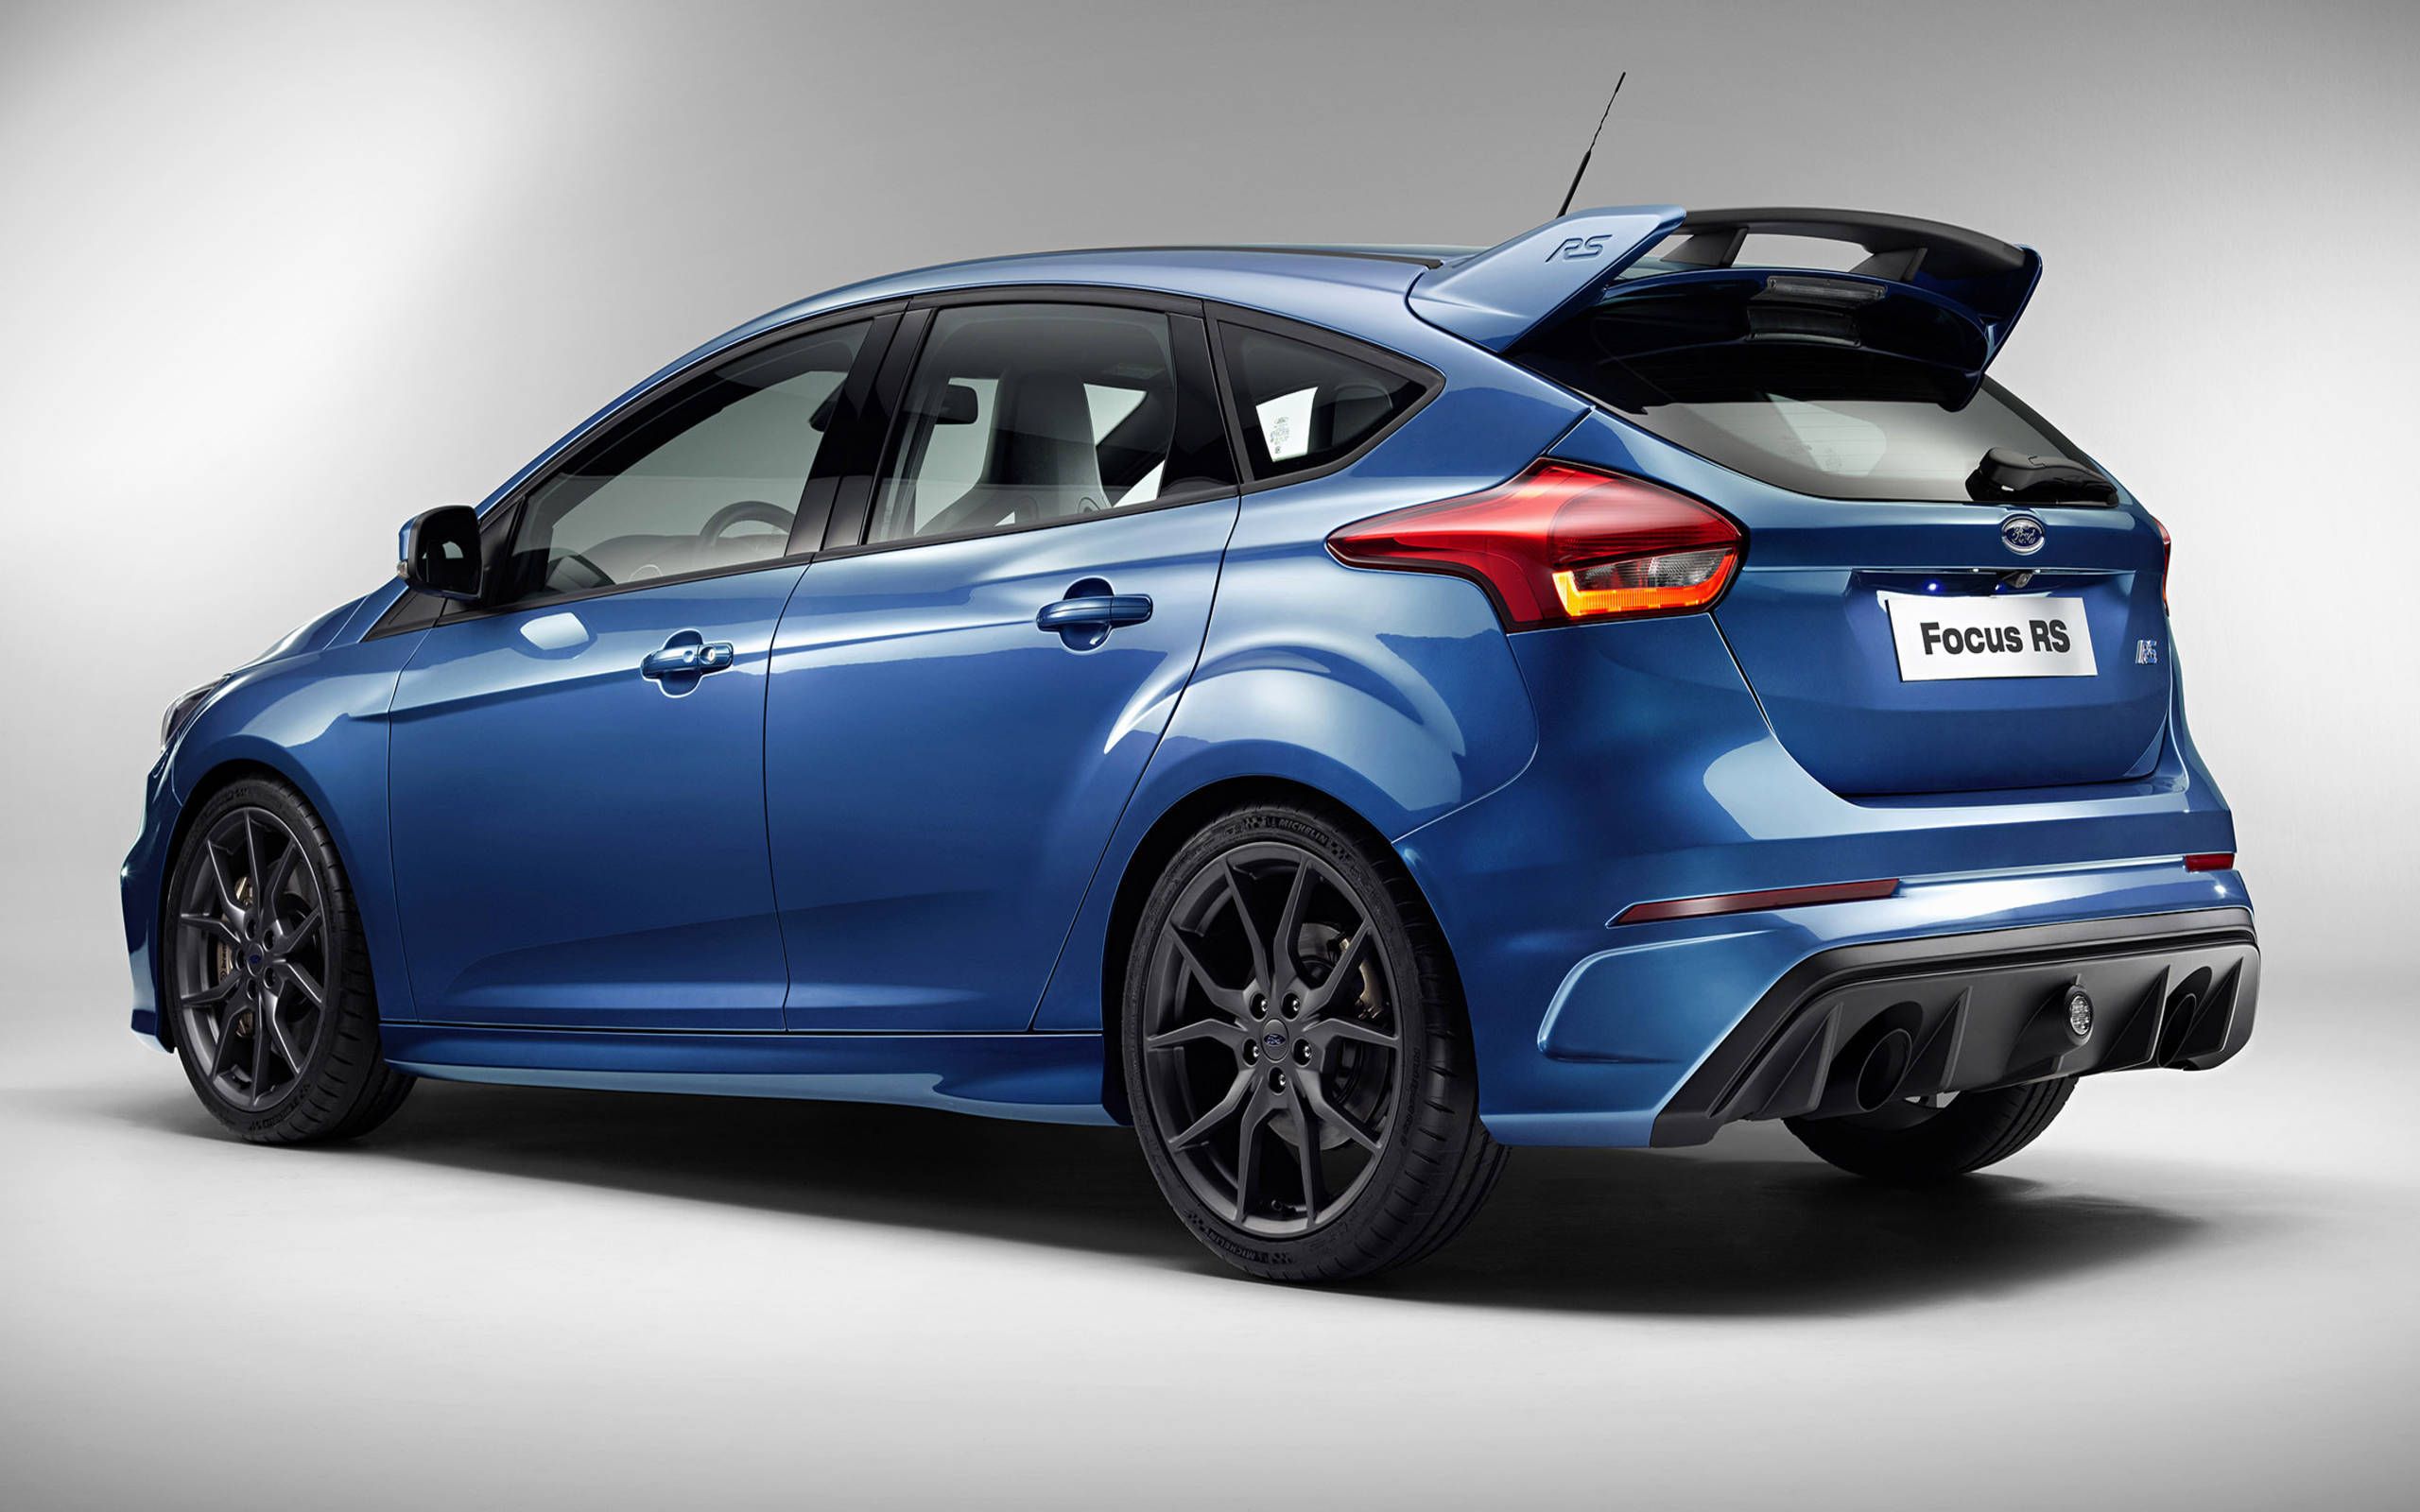 US-bound 2016 Ford Focus RS bows at Geneva auto show